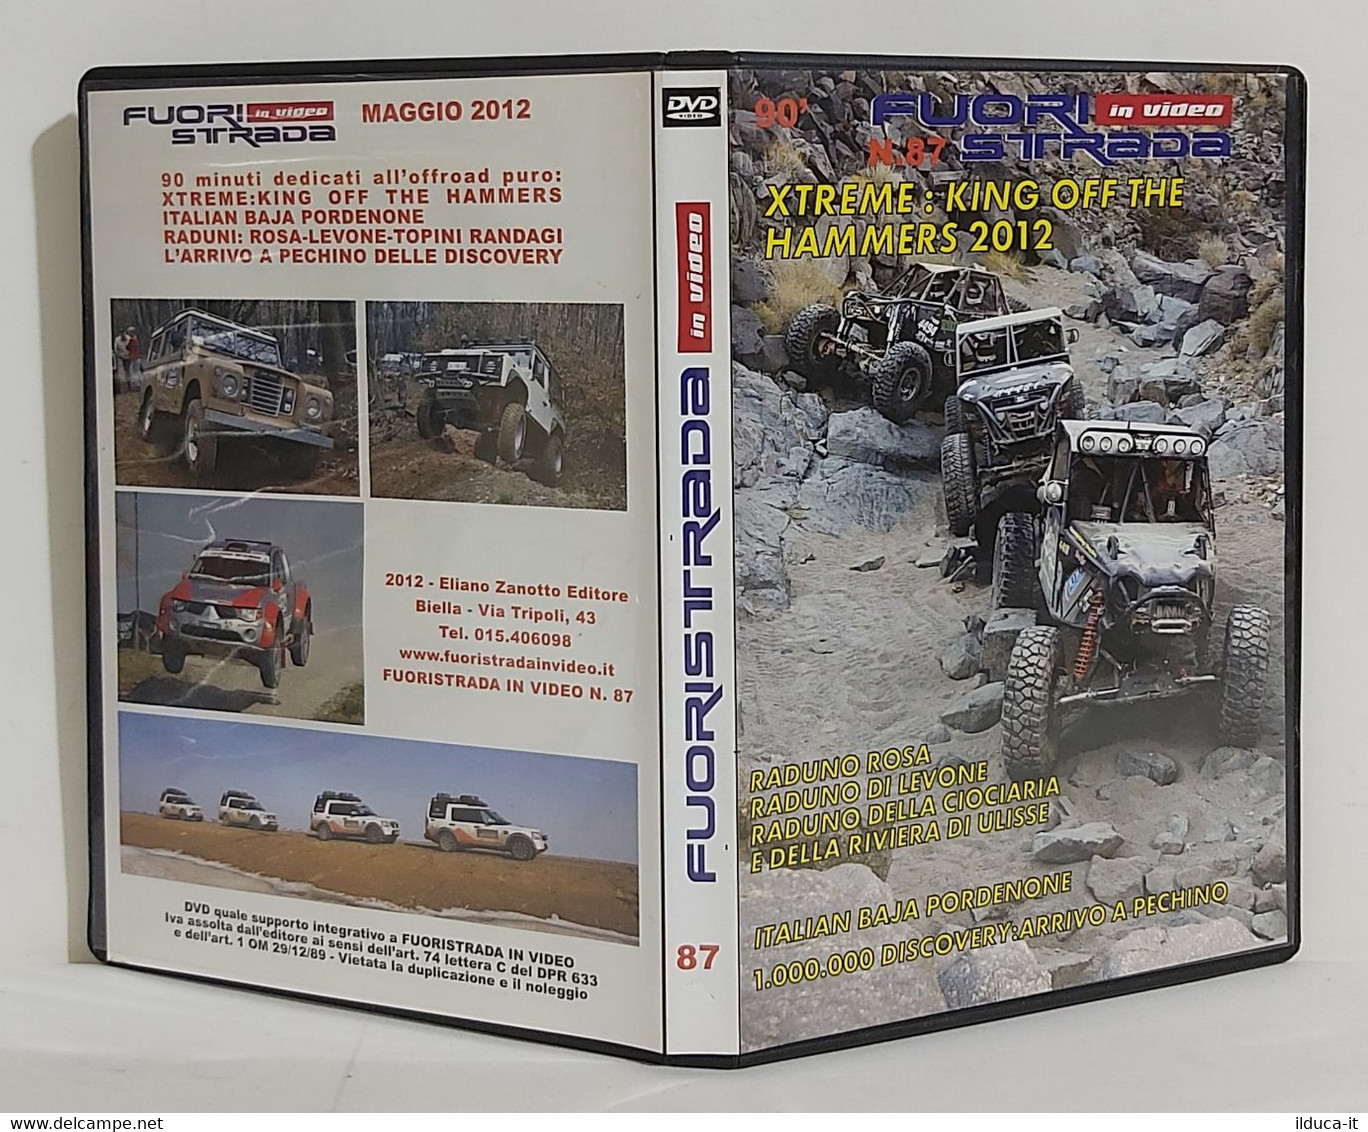 I101815 DVD - Fuoristrada In Video N. 87 - Xtreme: King Off The Hammers 2012 - Deporte